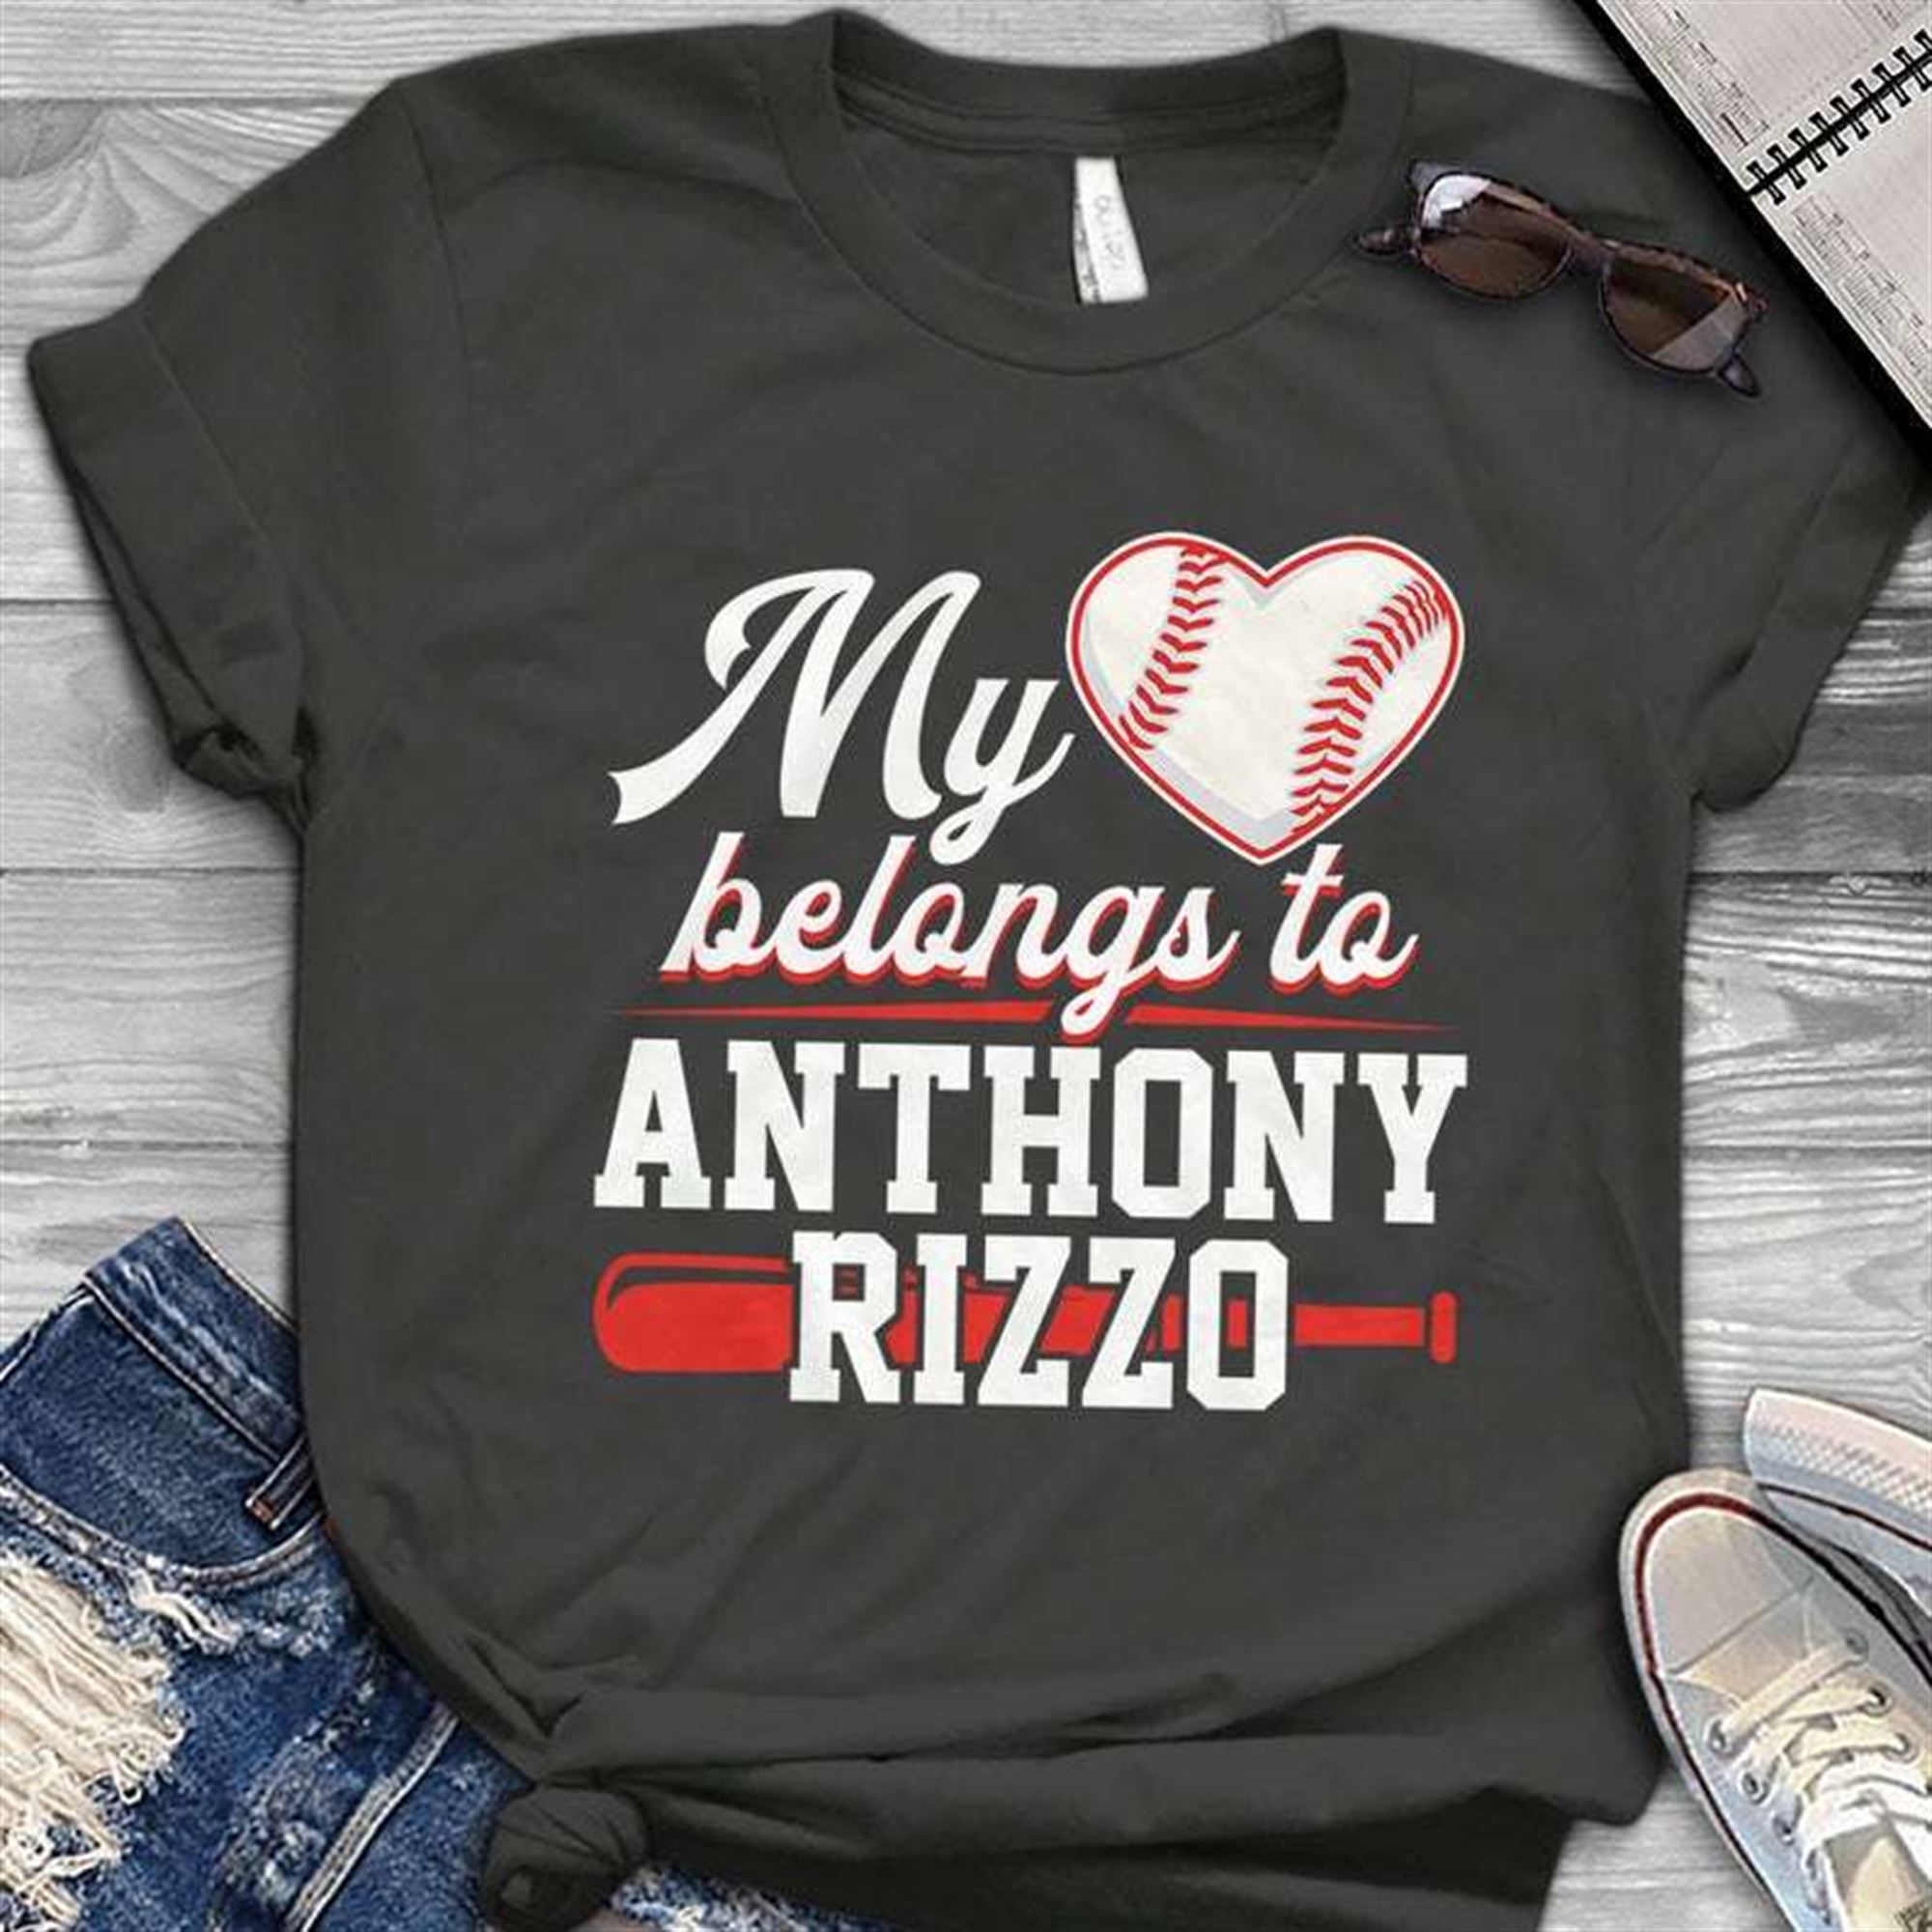 My Heart Belongs To Anthony Rizzo Our Captain Forever T-shirt Plus Size Up To 5x